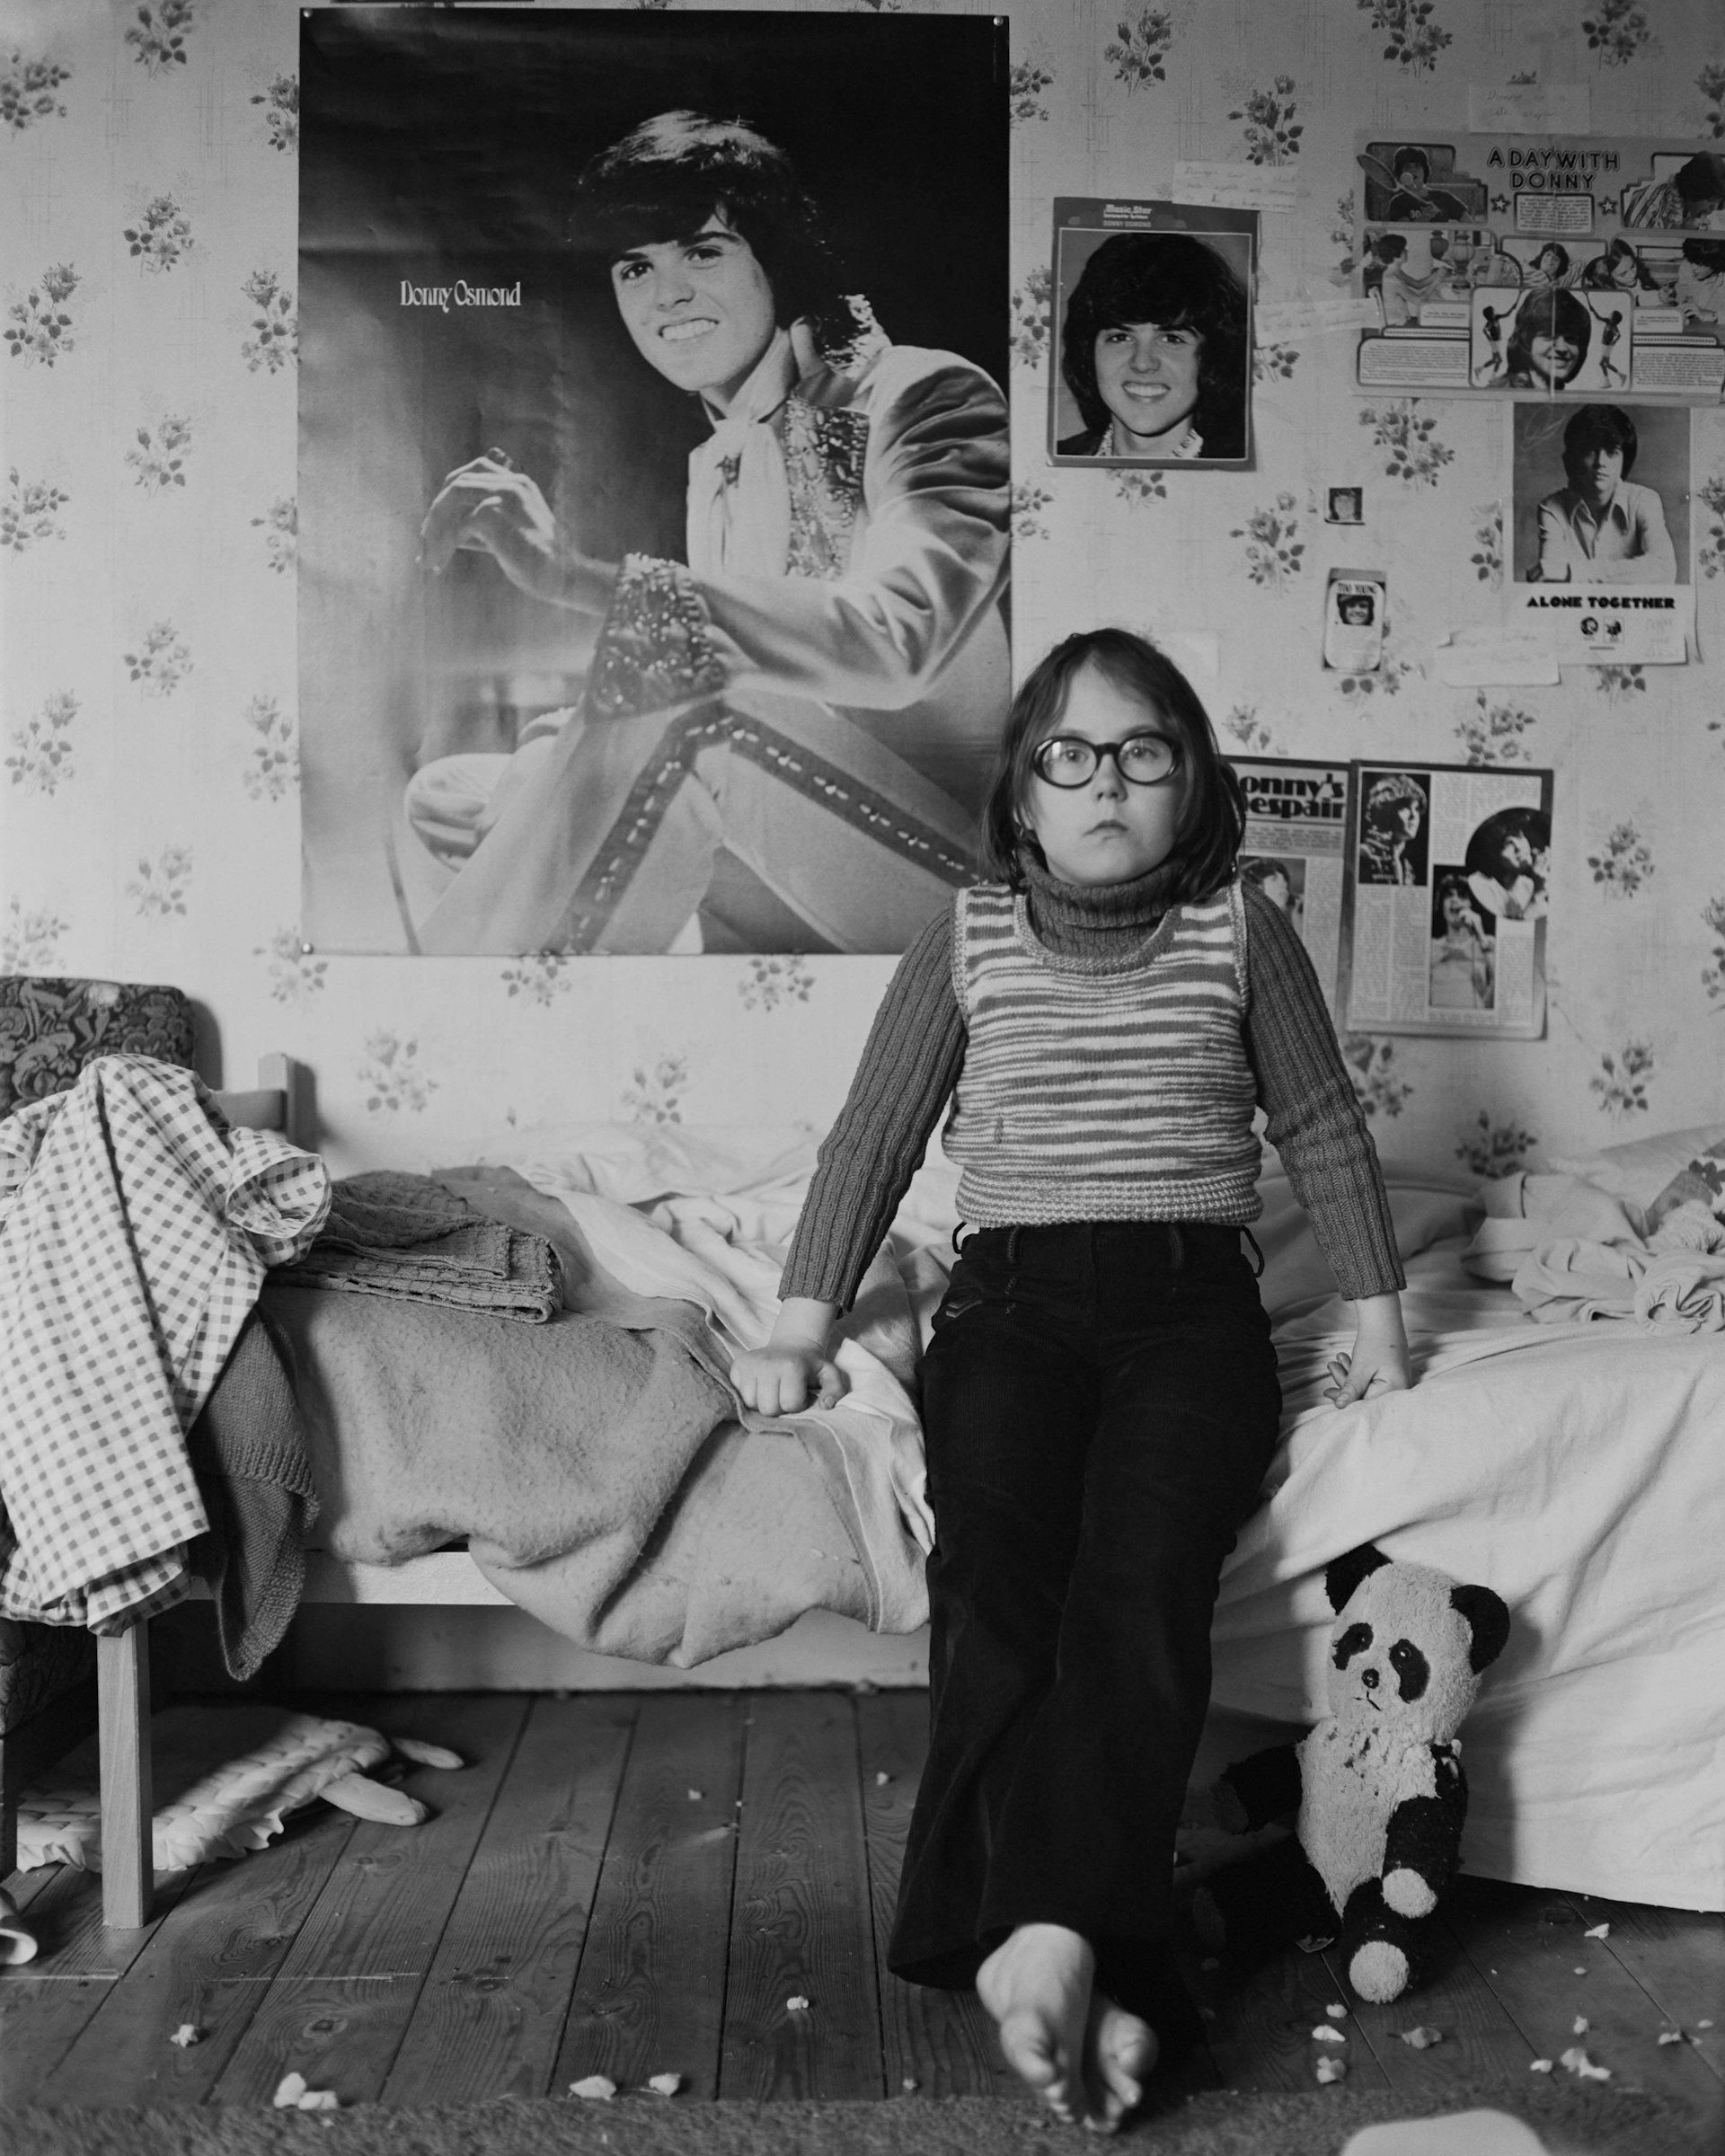 An intimate look at ’70s life in the West Midlands